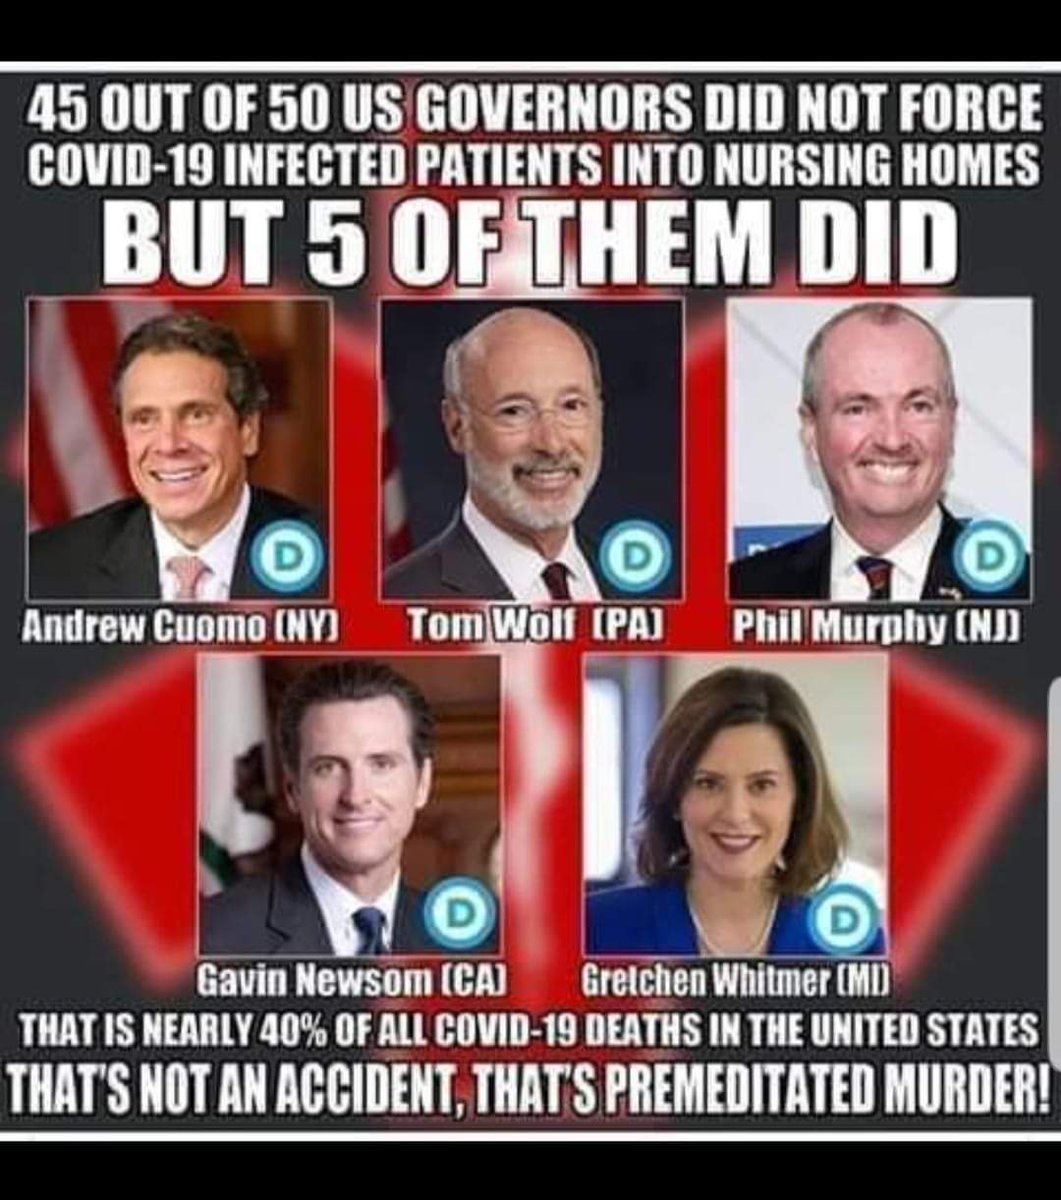 February 15, 2021 REMINDER; Democrat Governors murdered our elderly in nursing homes. And not only are they not in prison... they are still governing.